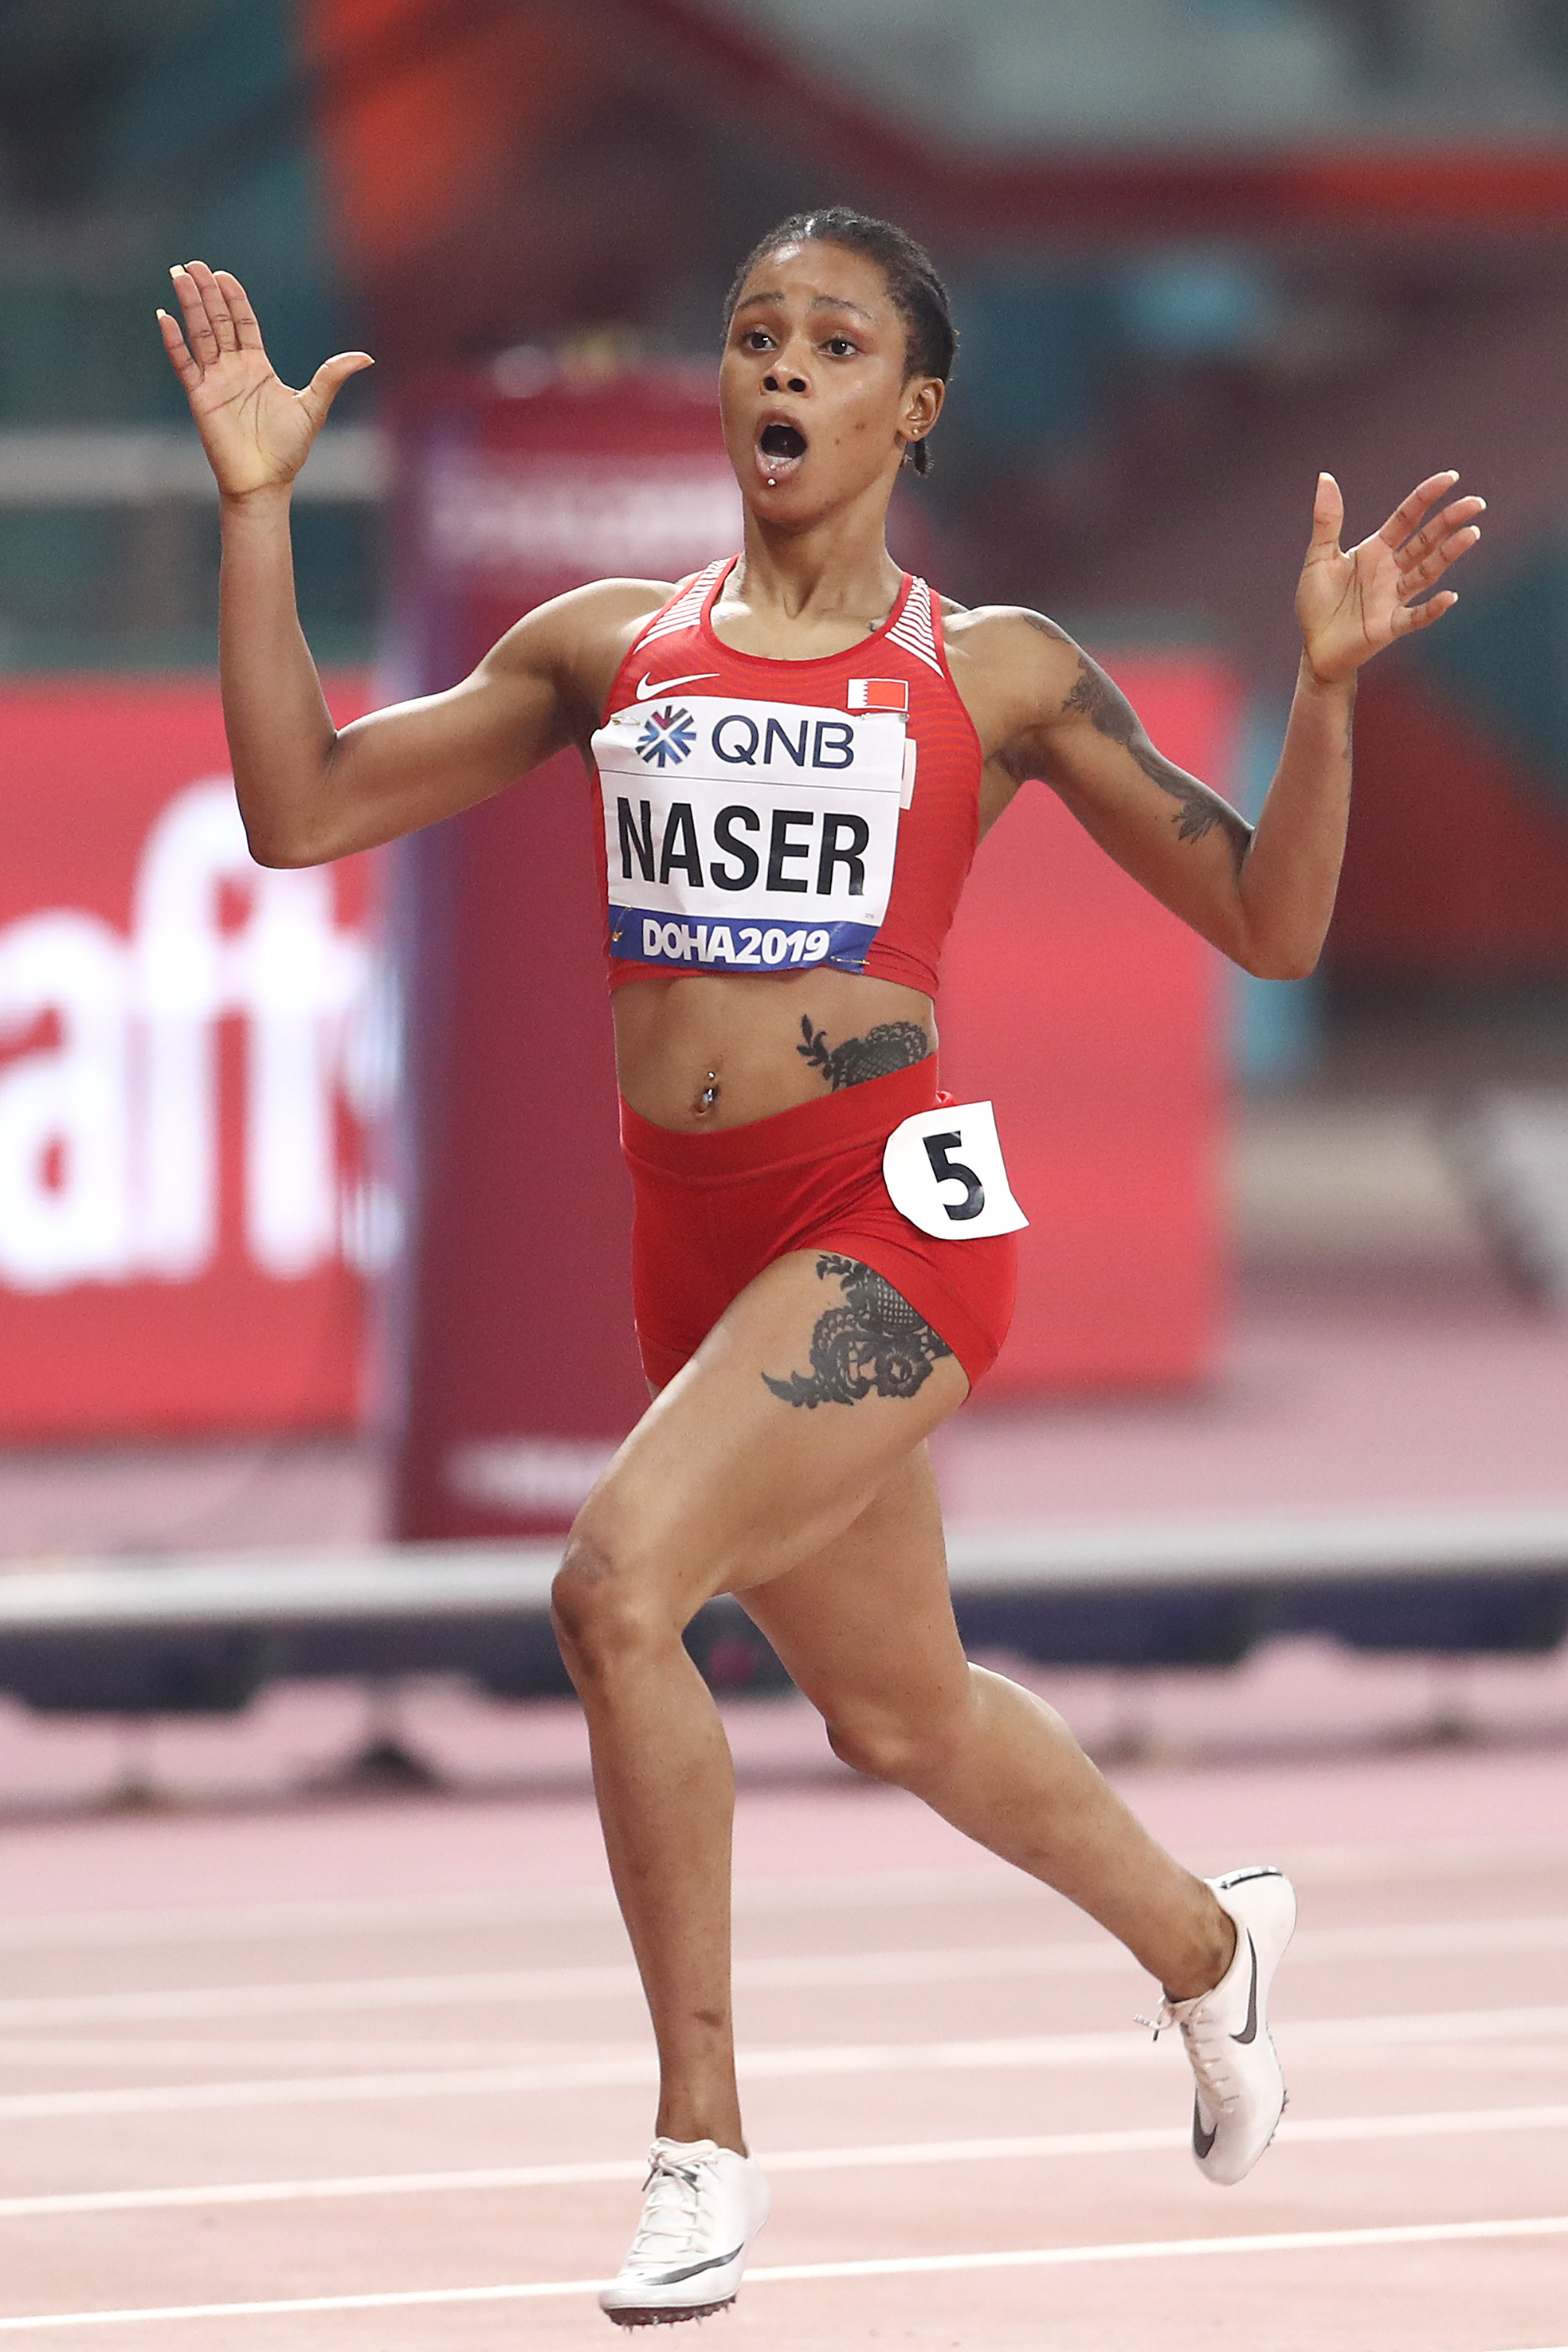 Salwa Eid Naser: “Didn’t really know how fast I was going” #Doha2019